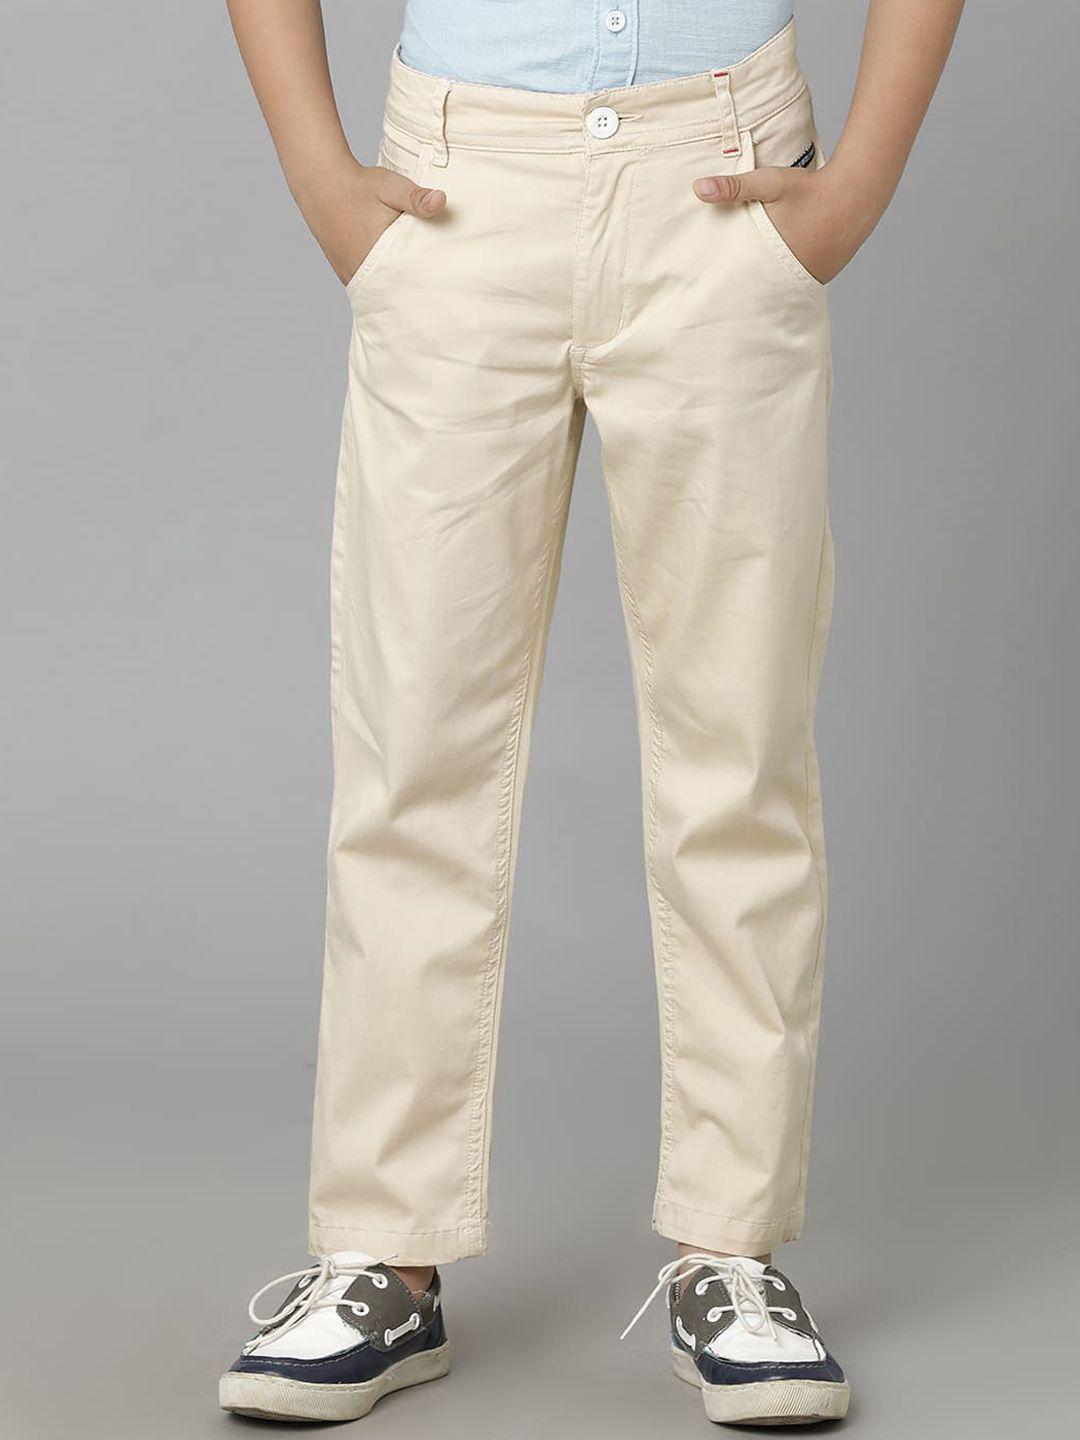 under fourteen only boys cotton chinos trousers